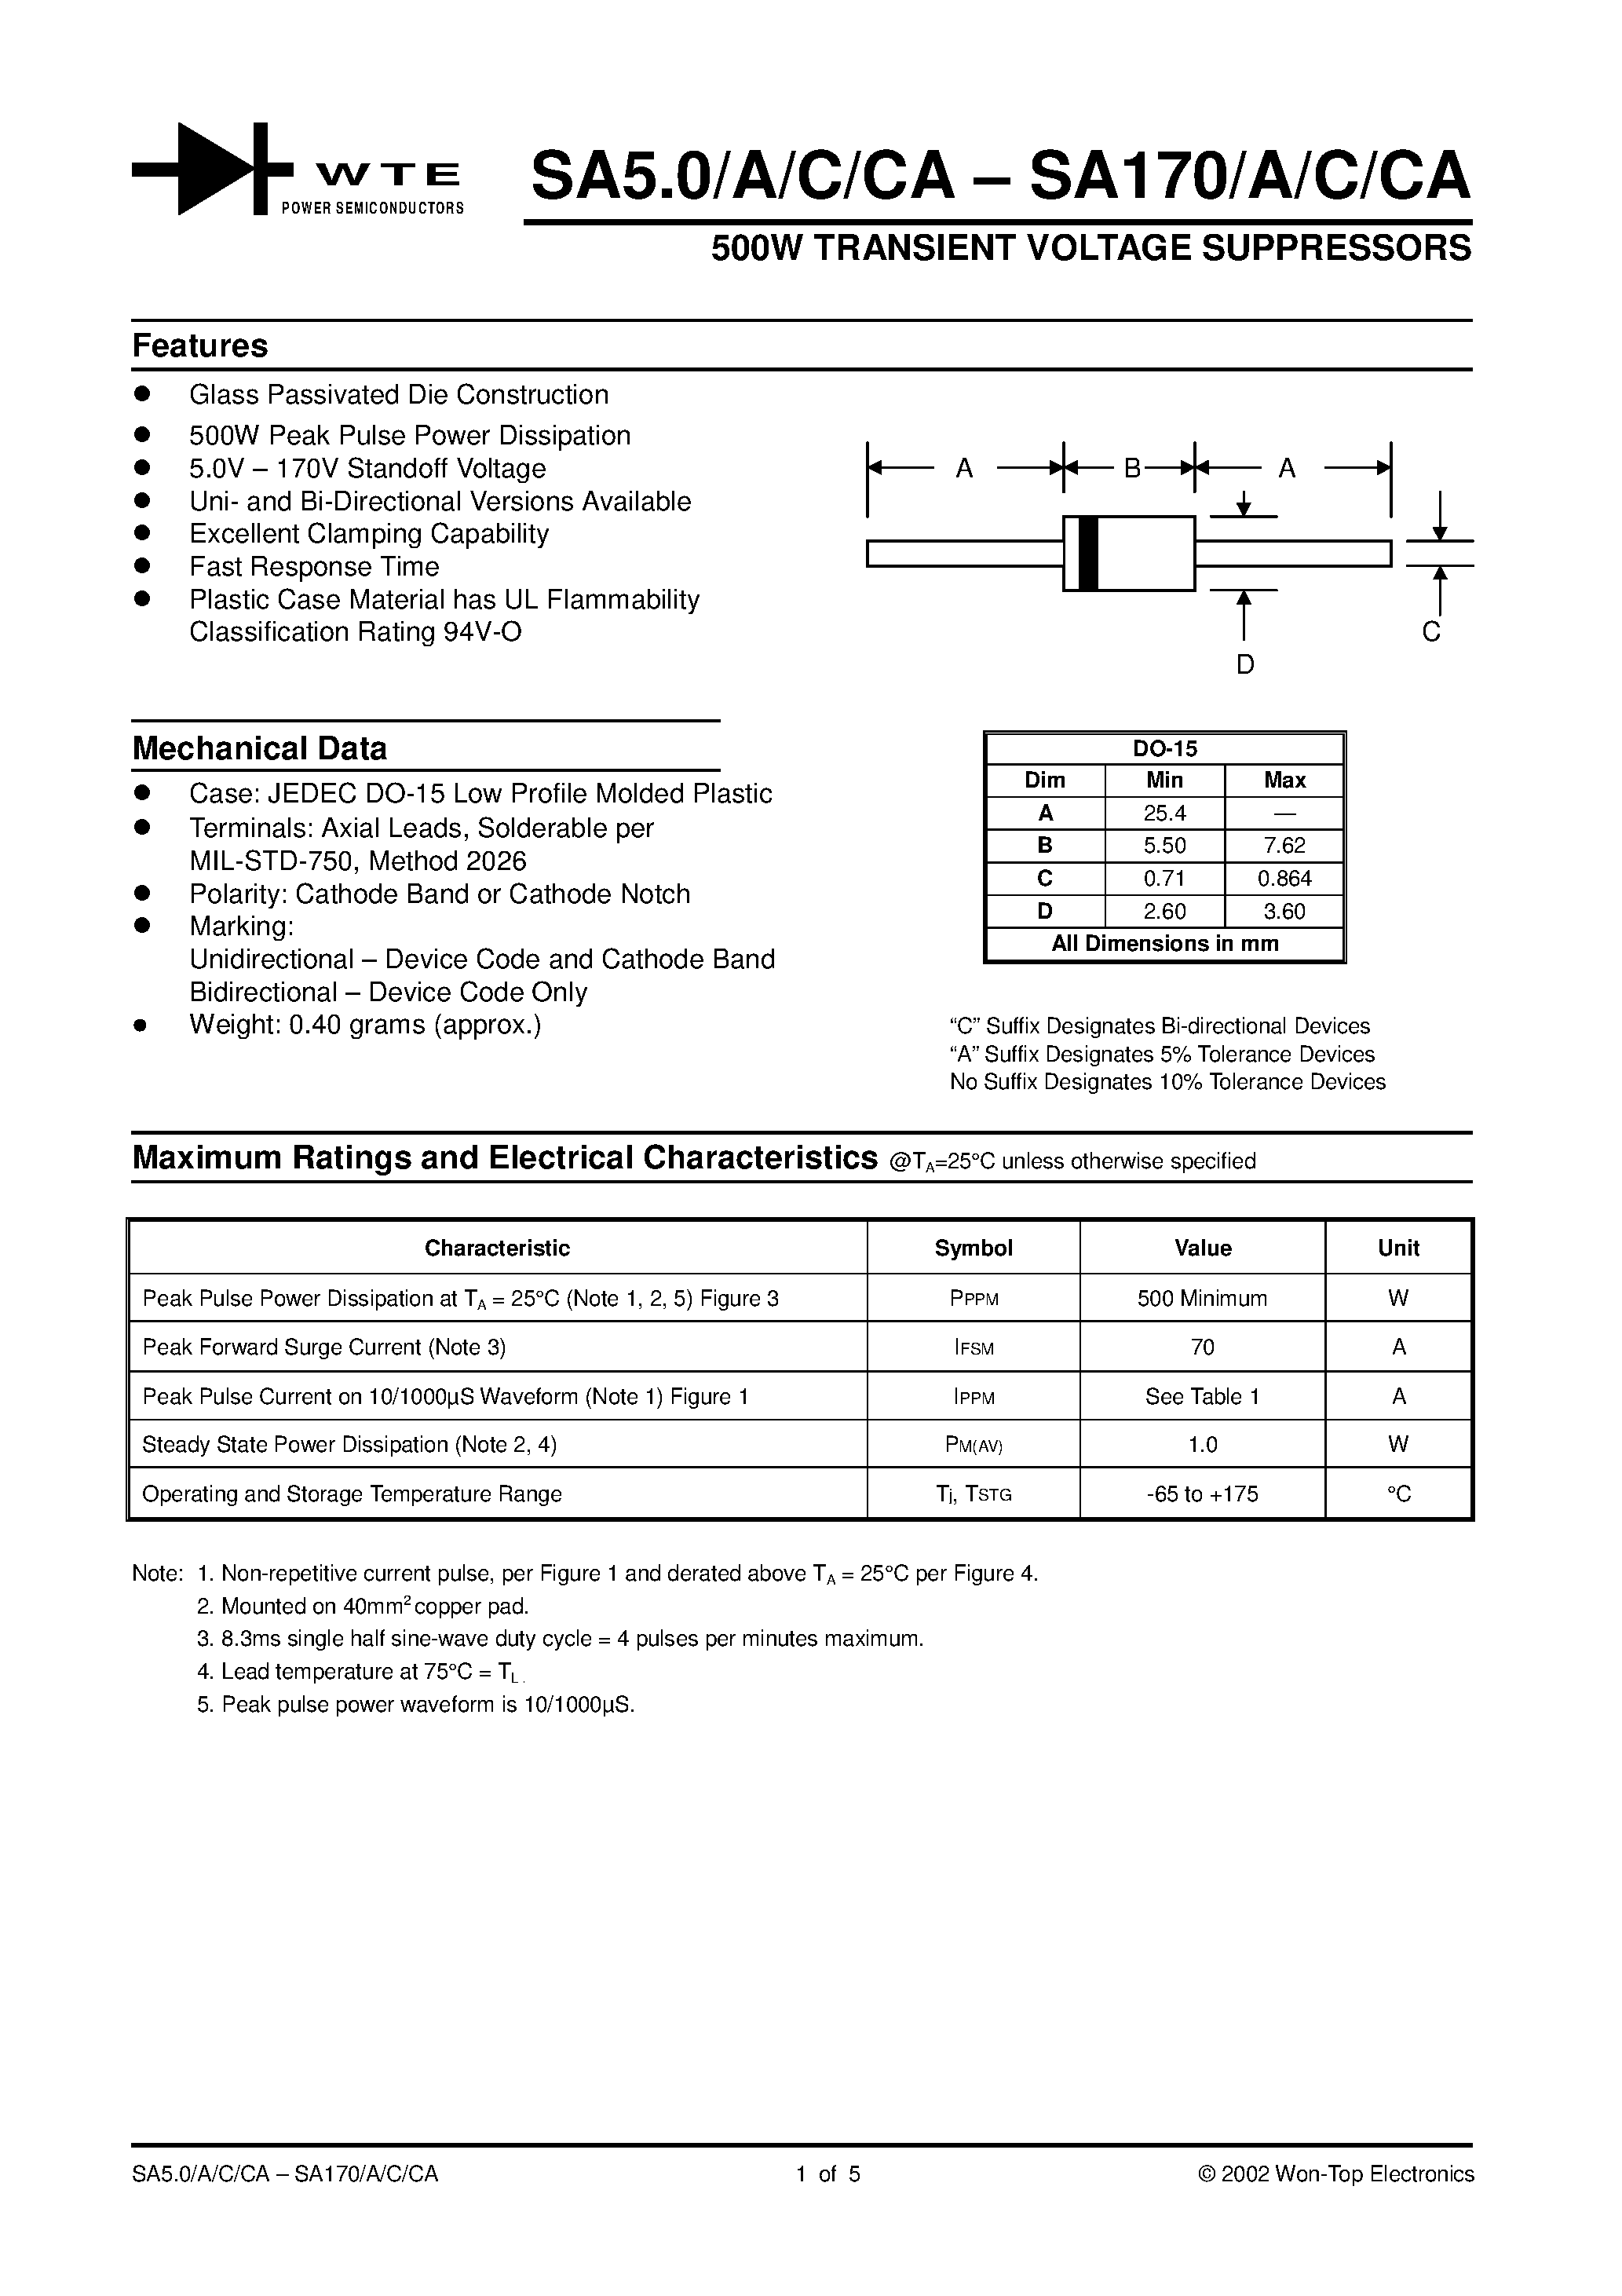 Datasheet SA26A - 500W TRANSIENT VOLTAGE SUPPRESSORS page 1